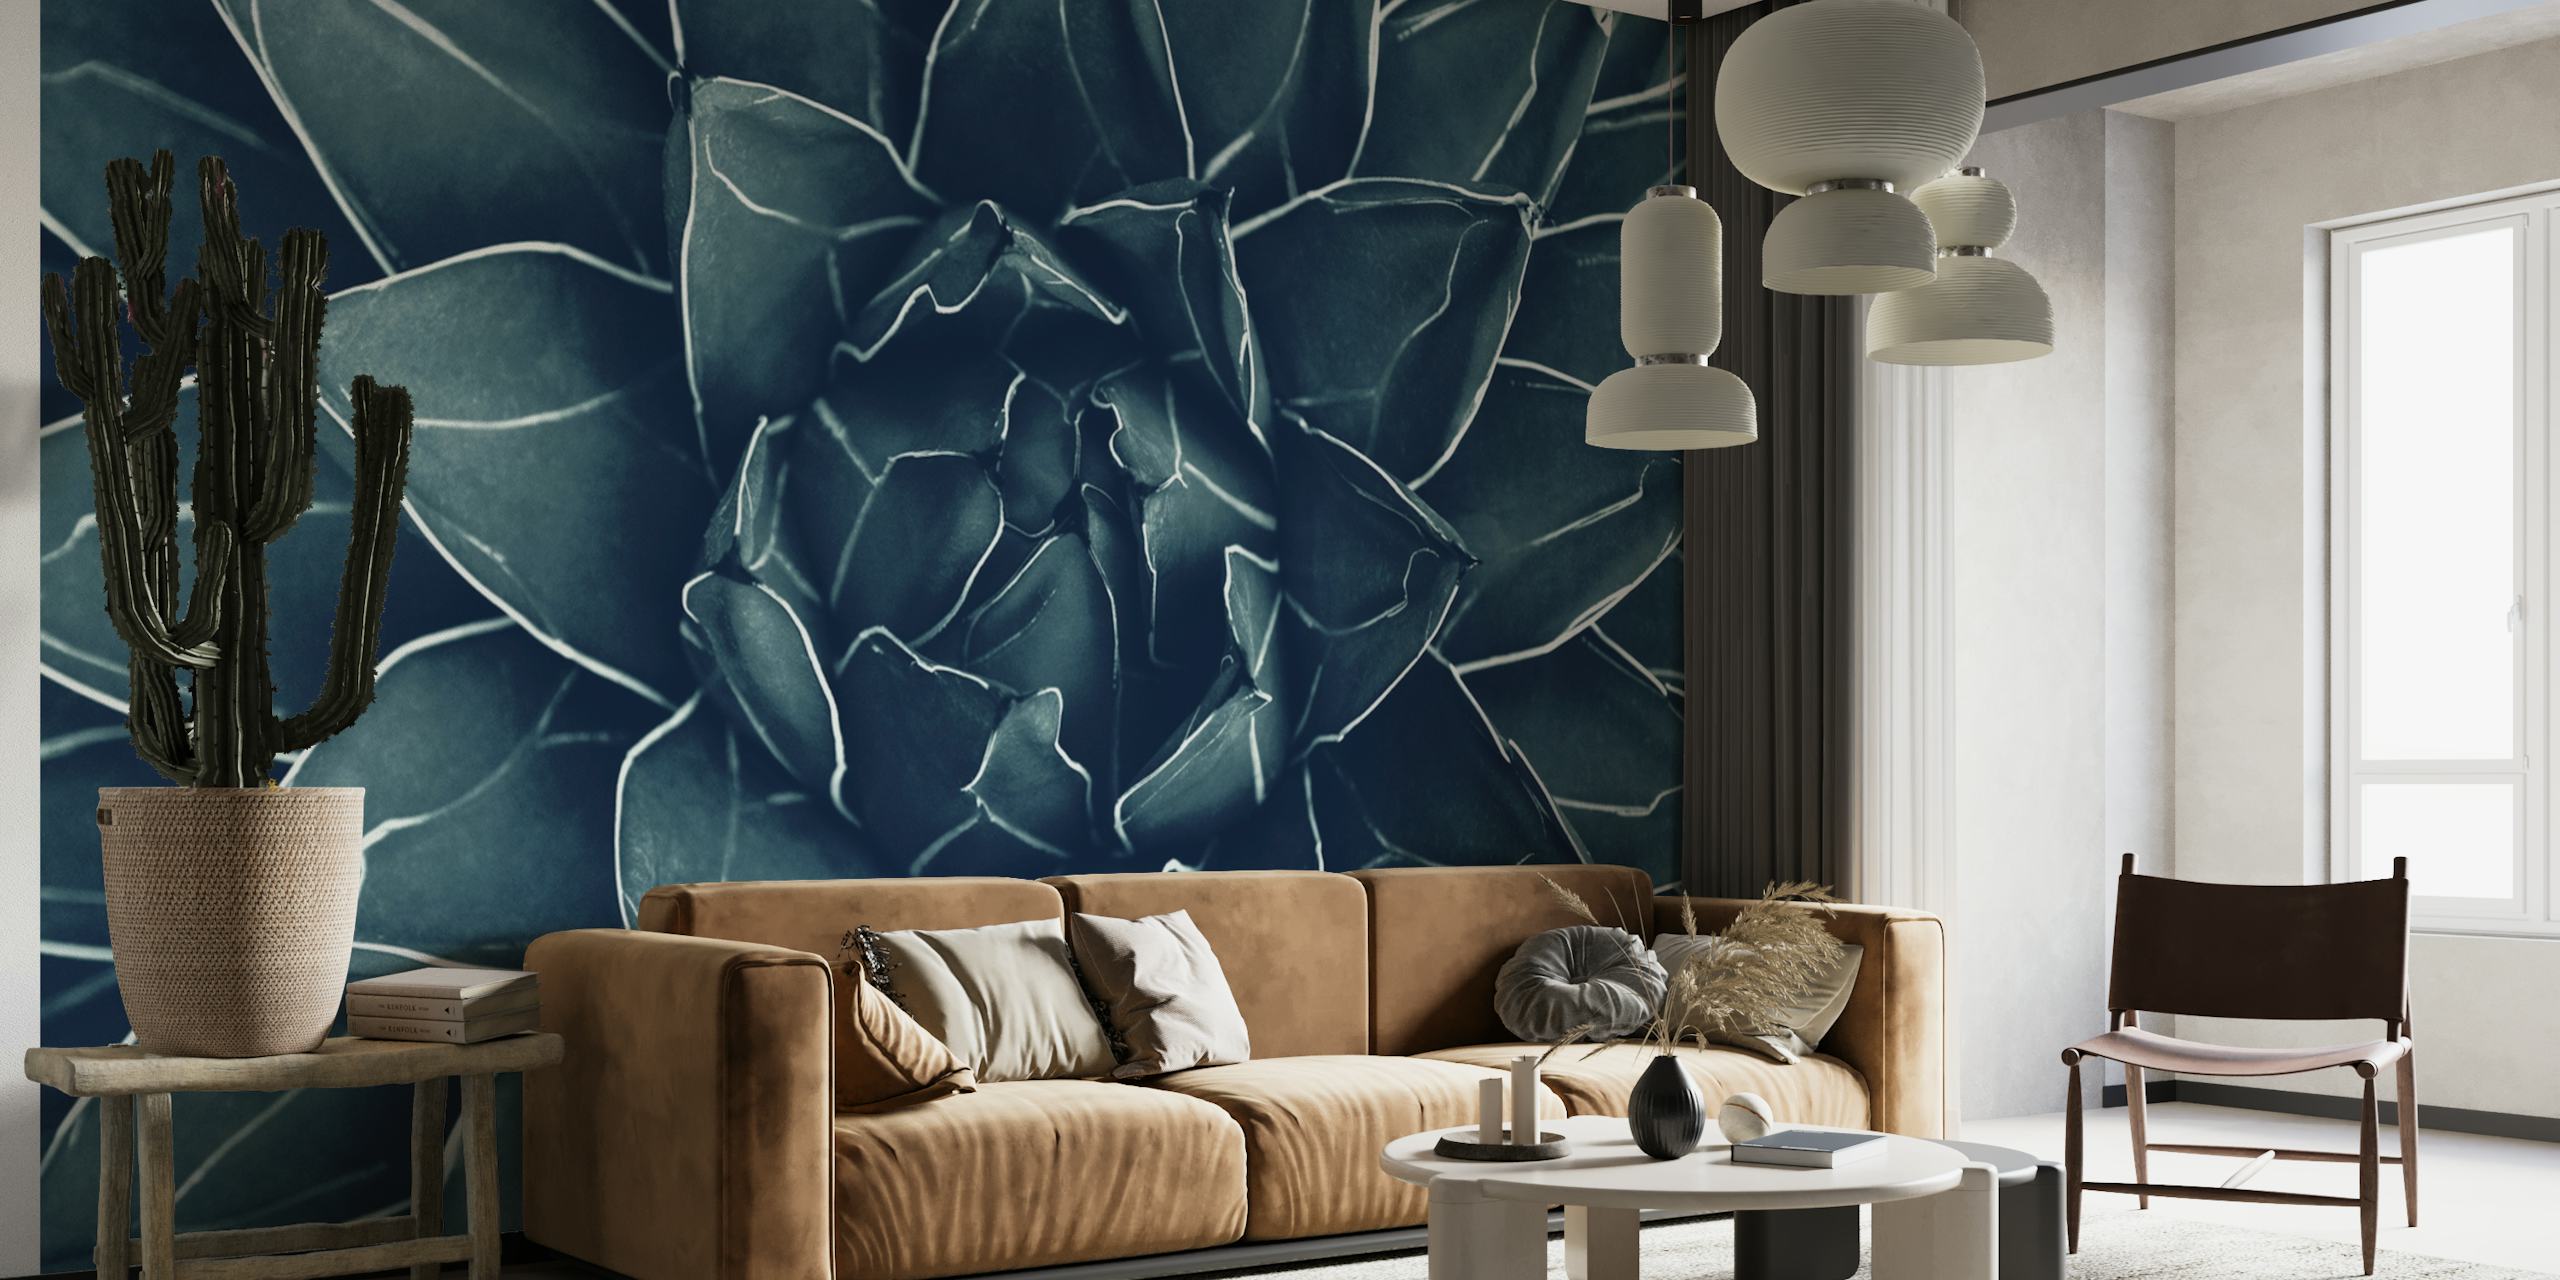 Agave Queen Succulent wall mural with detailed leaf textures in cool tones